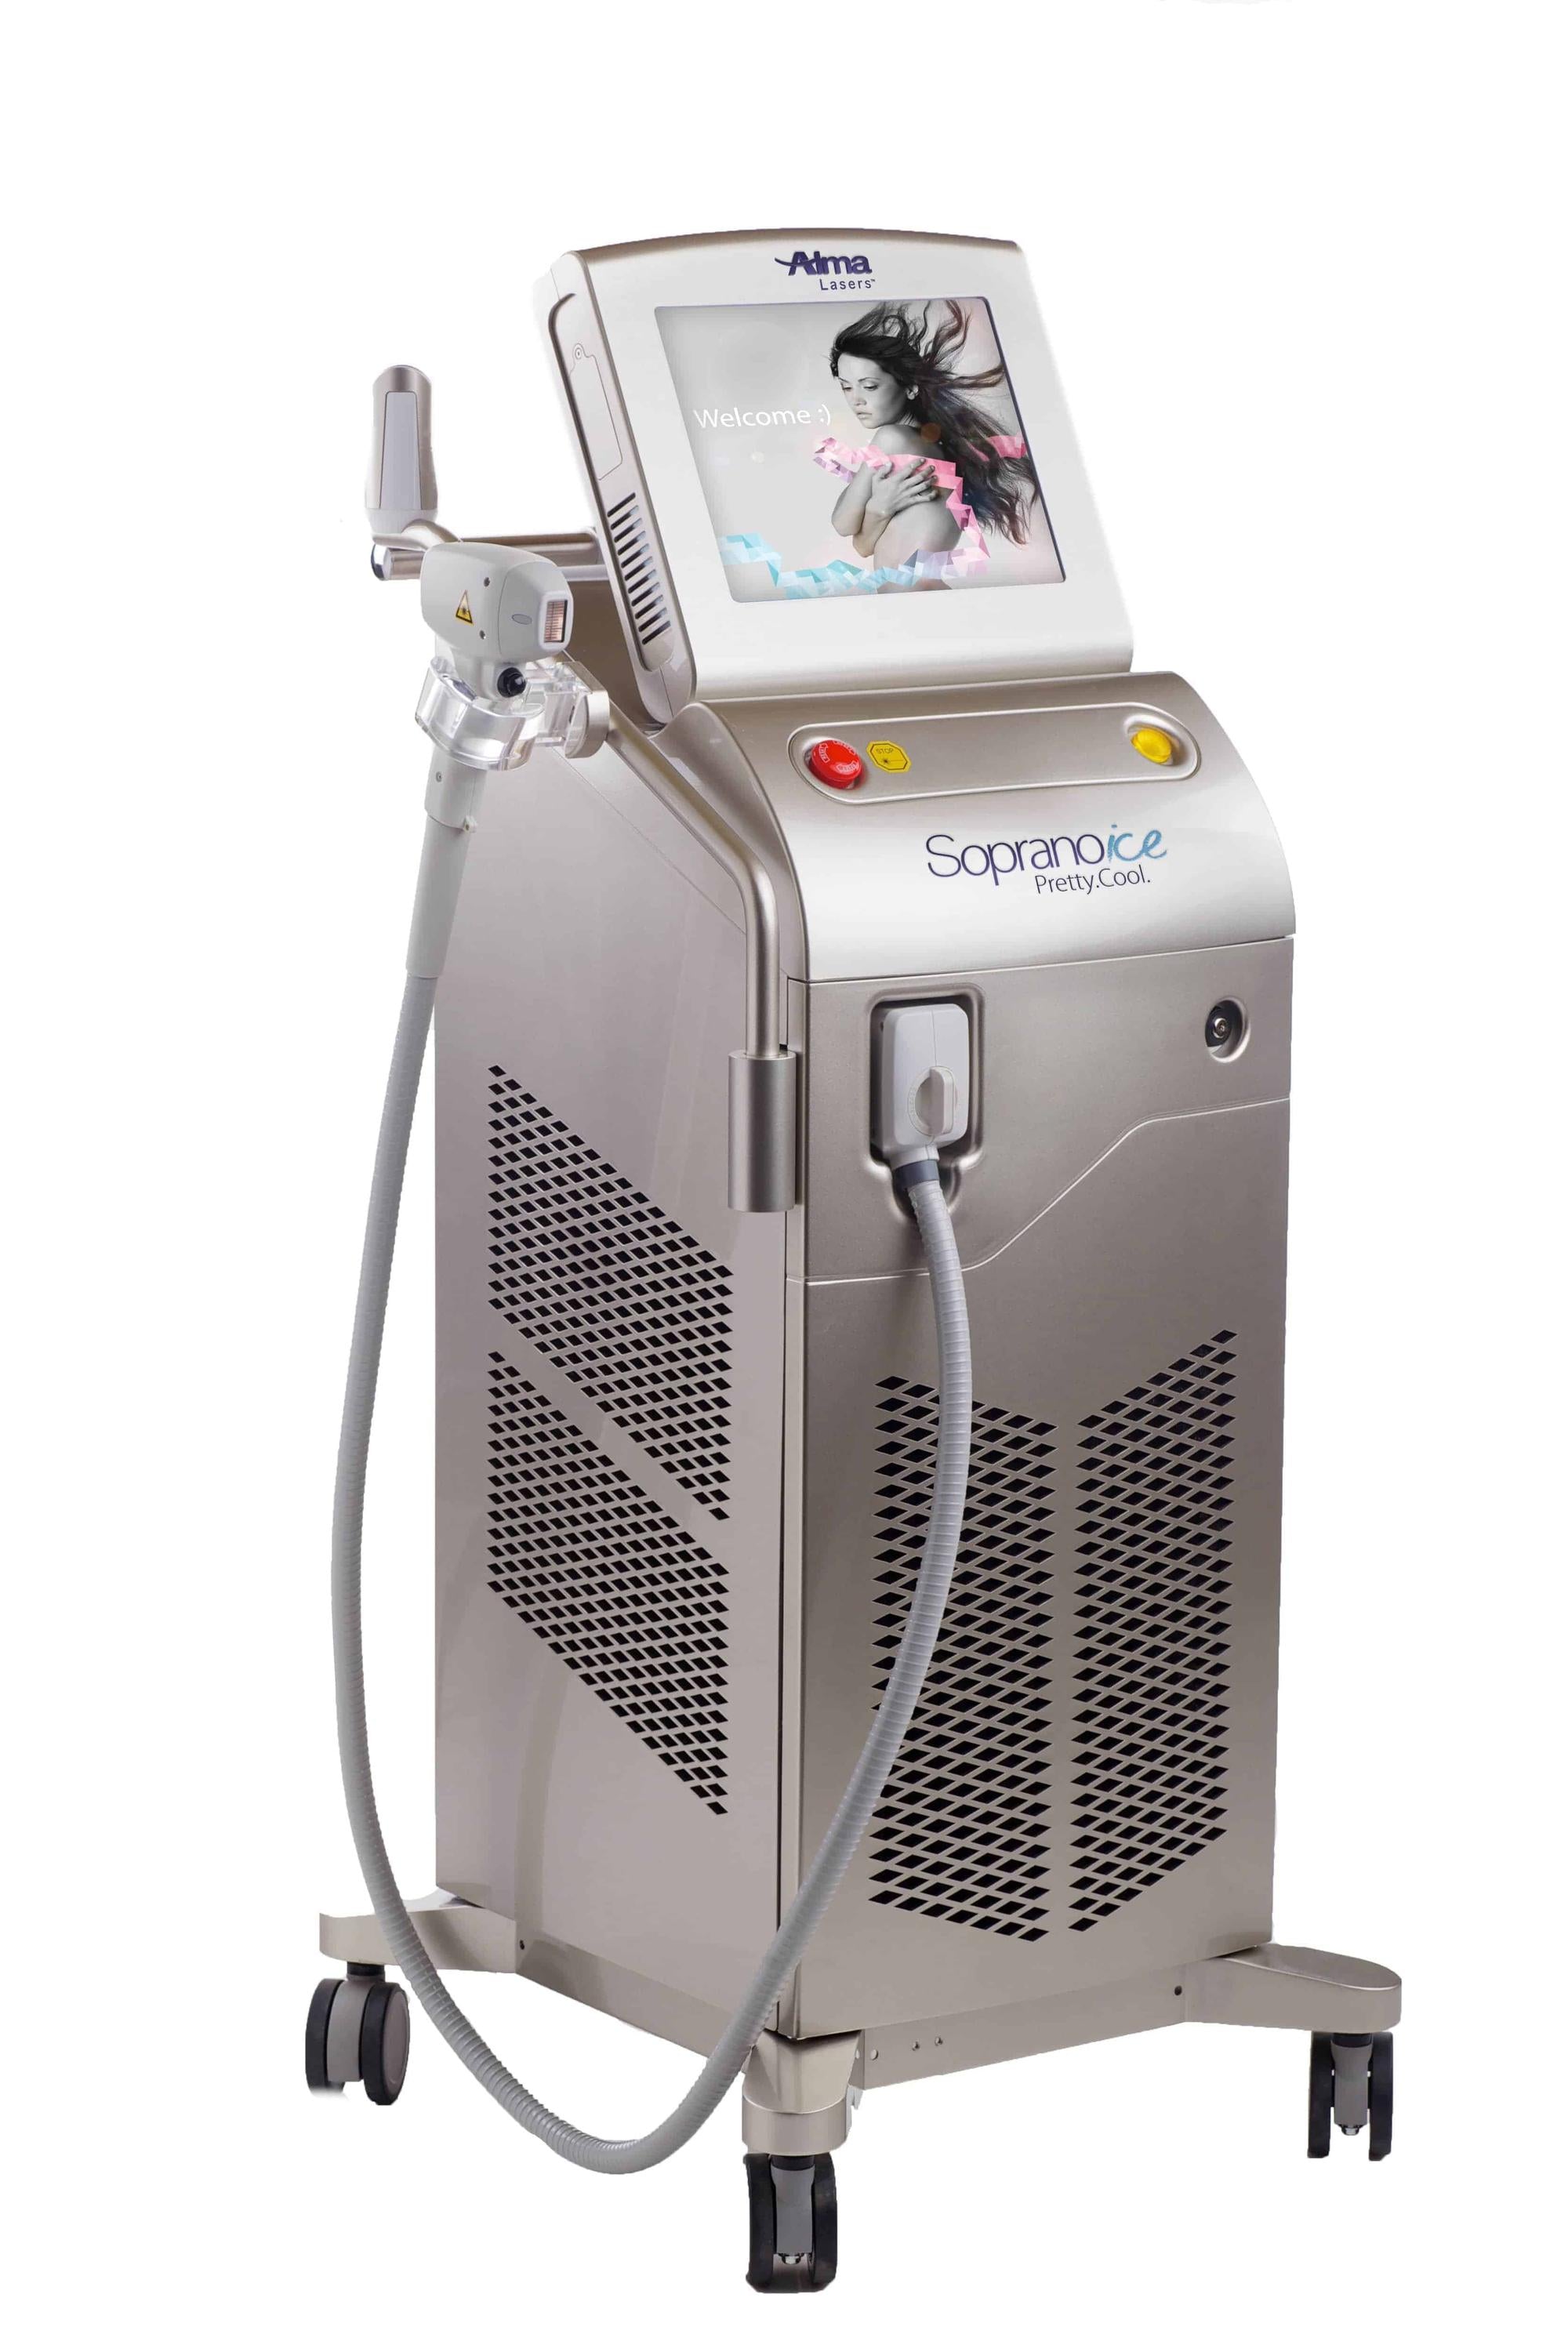 GLO Beauty brings you the latest in pain free laser hair removal in Pretoria with The Ice Soprano.